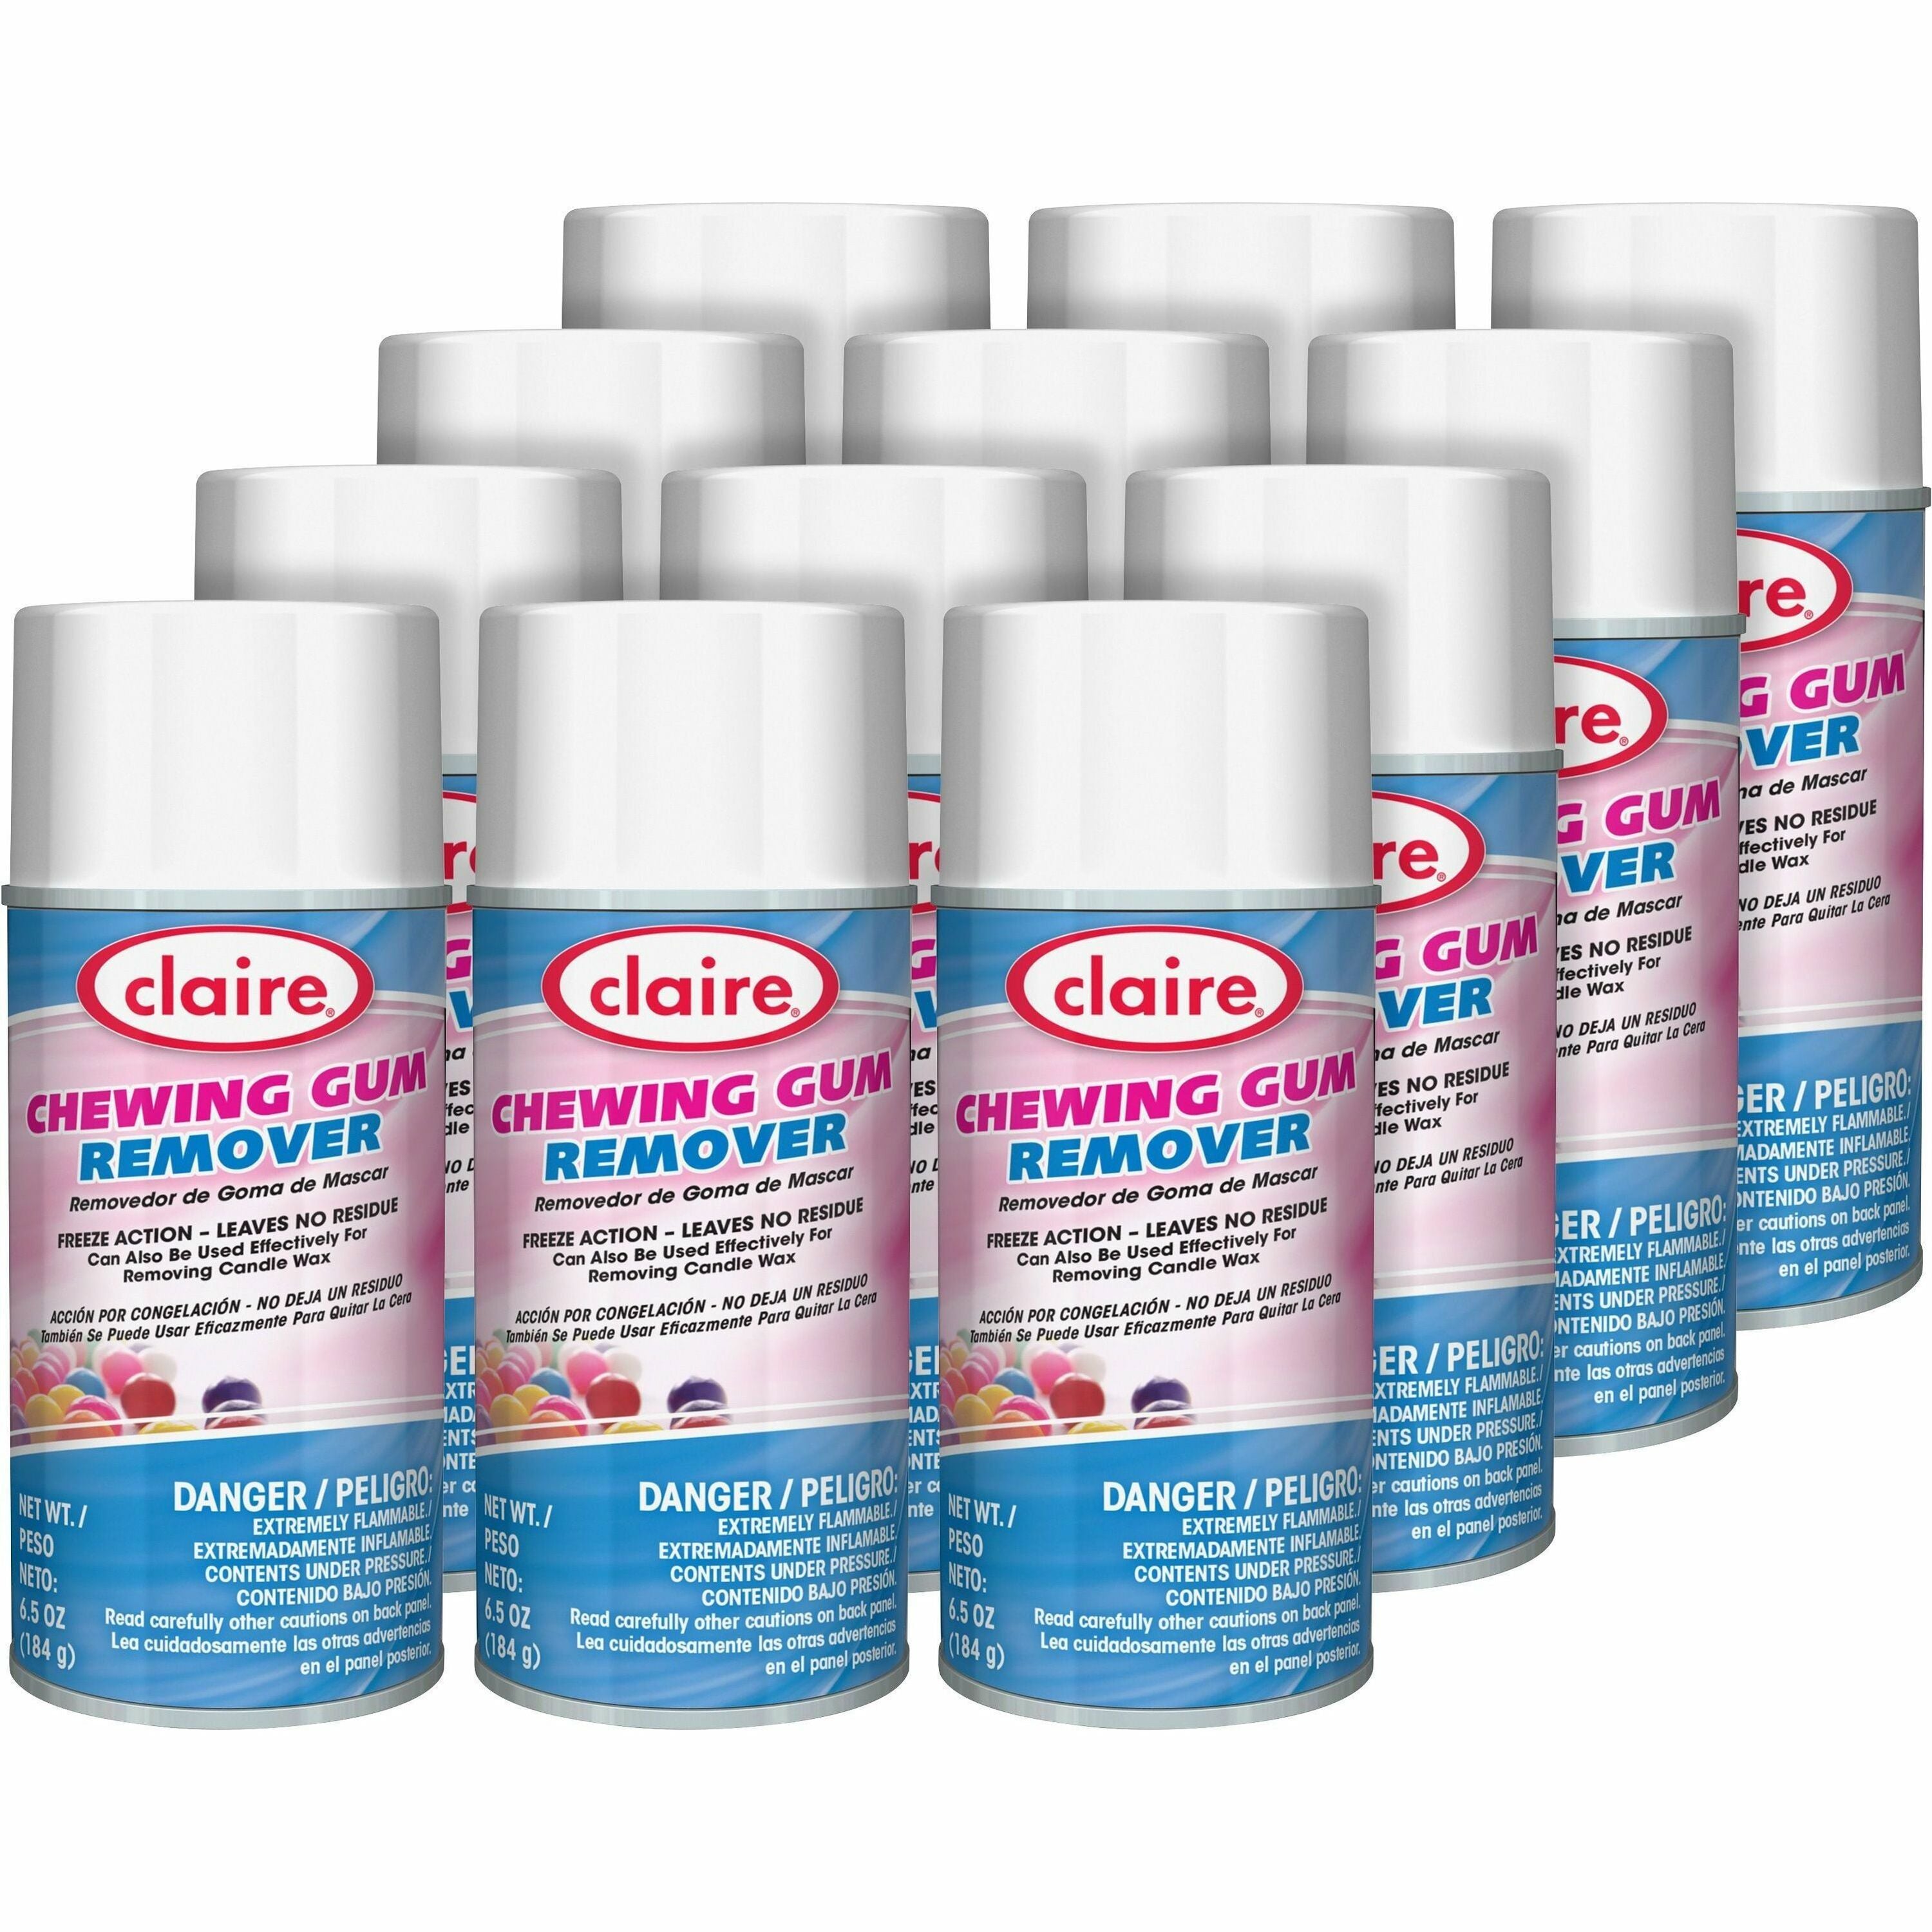 claire-chewing-gum-remover-12-fl-oz-04-quart-cherry-scent-12-carton-residue-free-non-staining-chemical-free-ozone-safe-colorless_cgccl813ct - 1